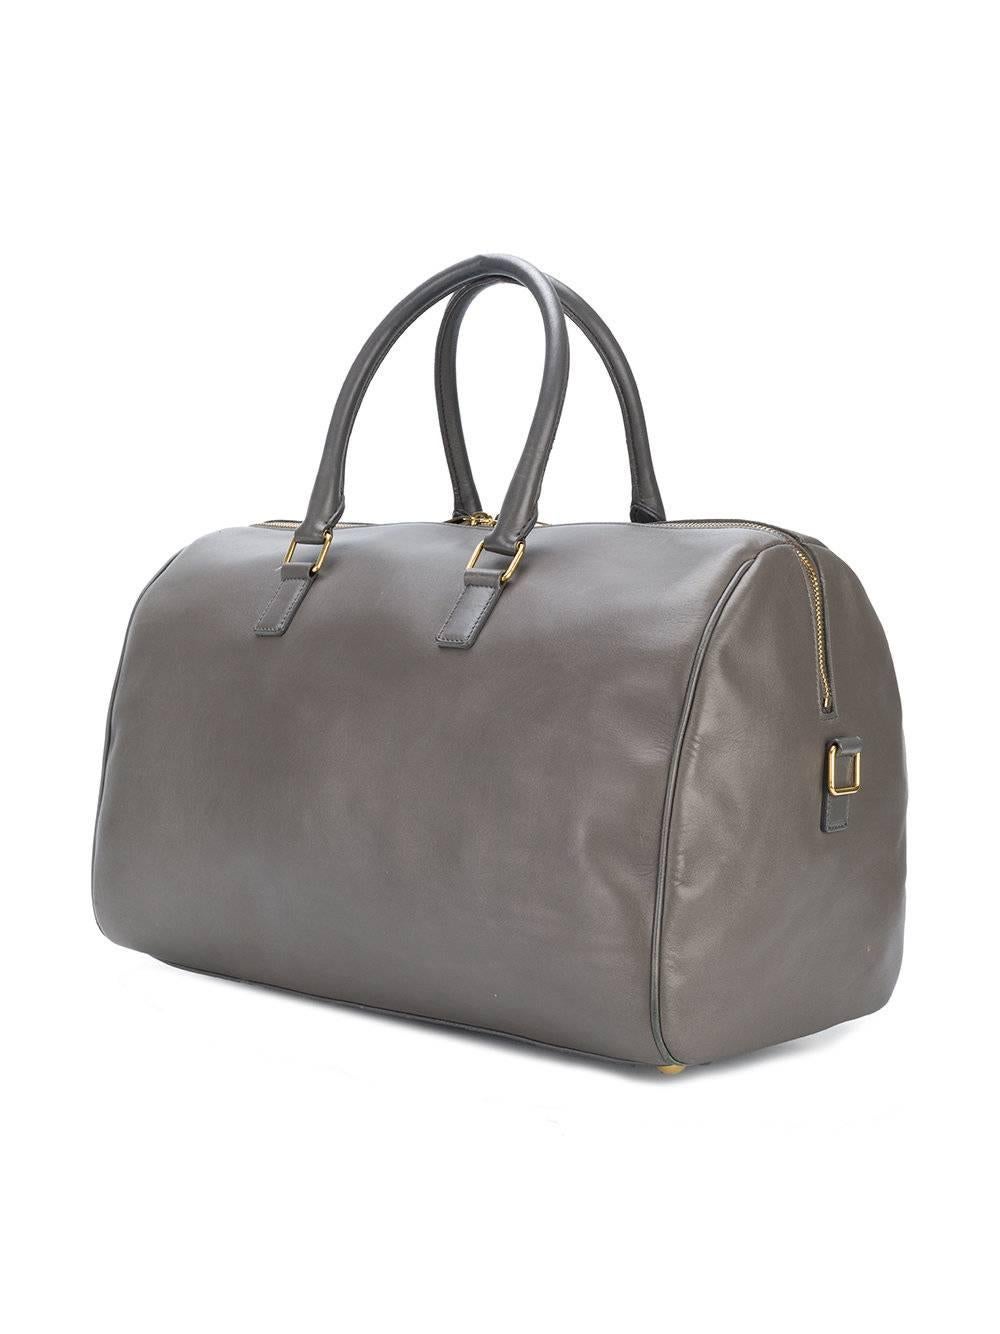 This veal grey calf leather and suede 2way travel bag from Yves Saint Laurent Vintage featuring round top handles, a detachable and adjustable shoulder strap, a double top zip closure, a main internal compartment, an internal zipped pocket, an